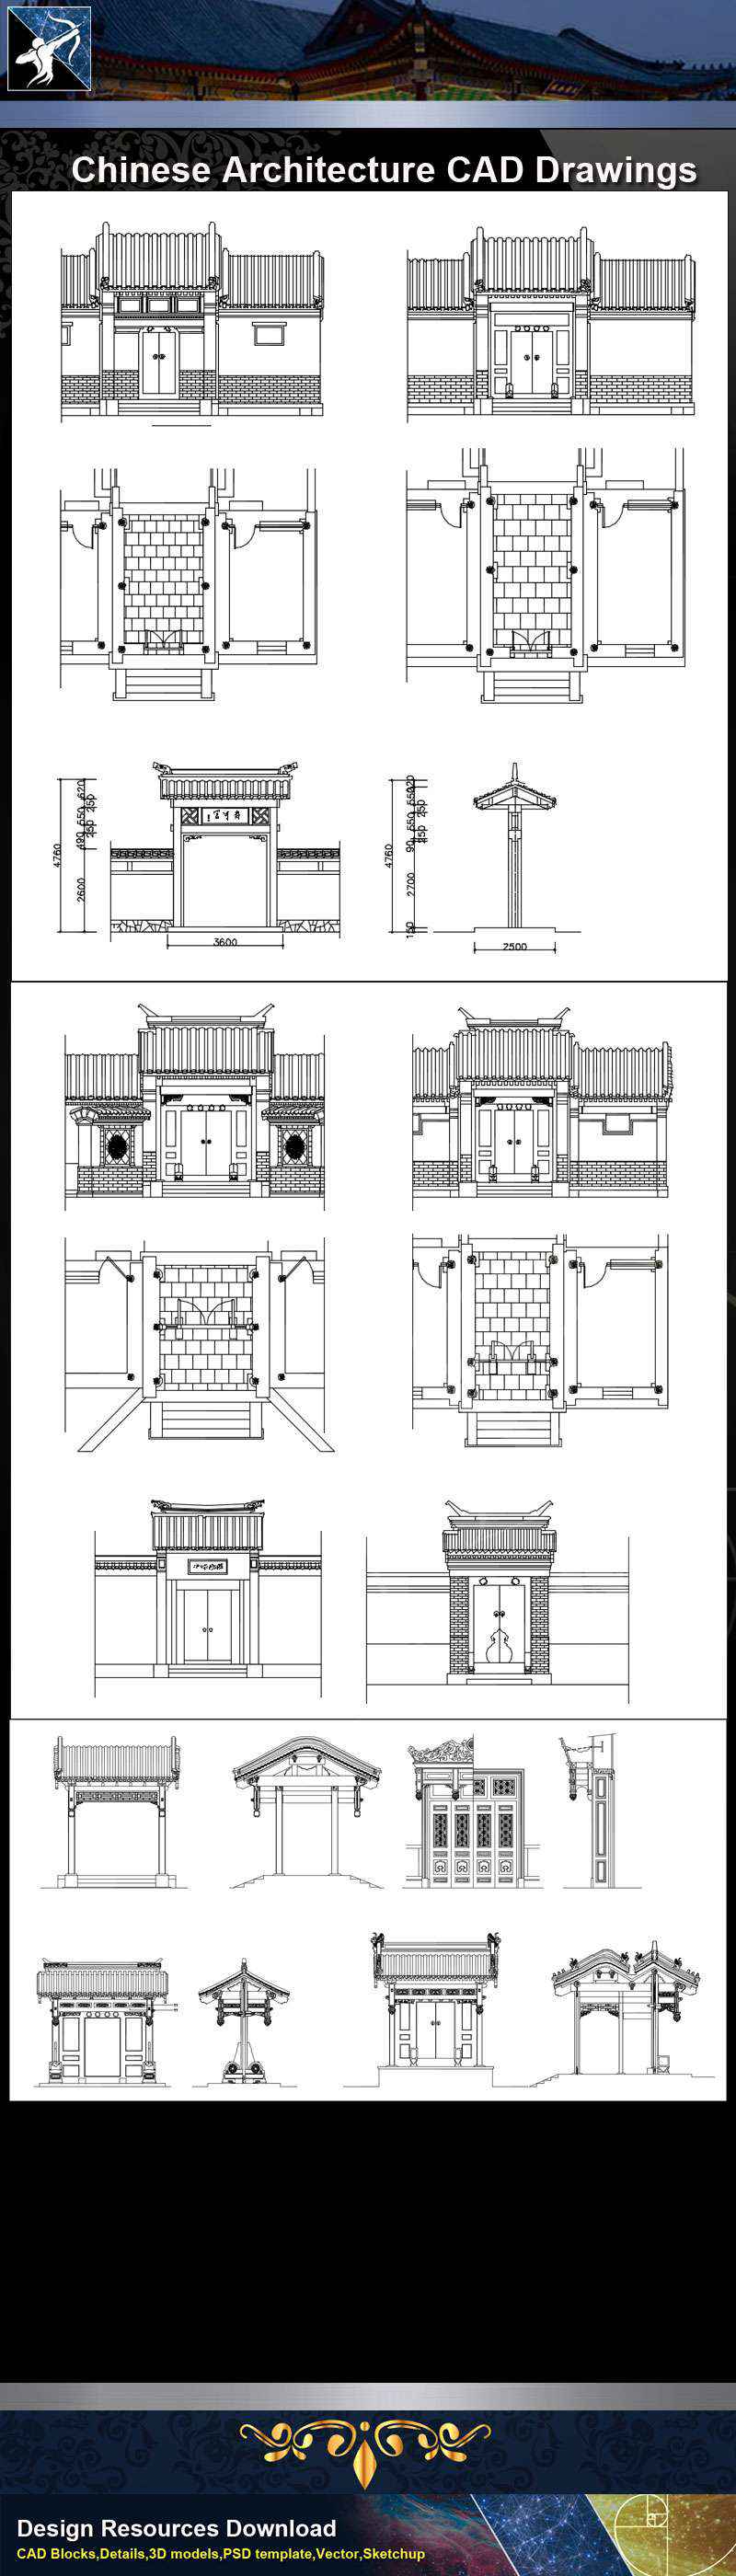 ★【Chinese Architecture CAD Drawings】@Chinese Gate,Door Design Drawings,CAD Details,Elevation